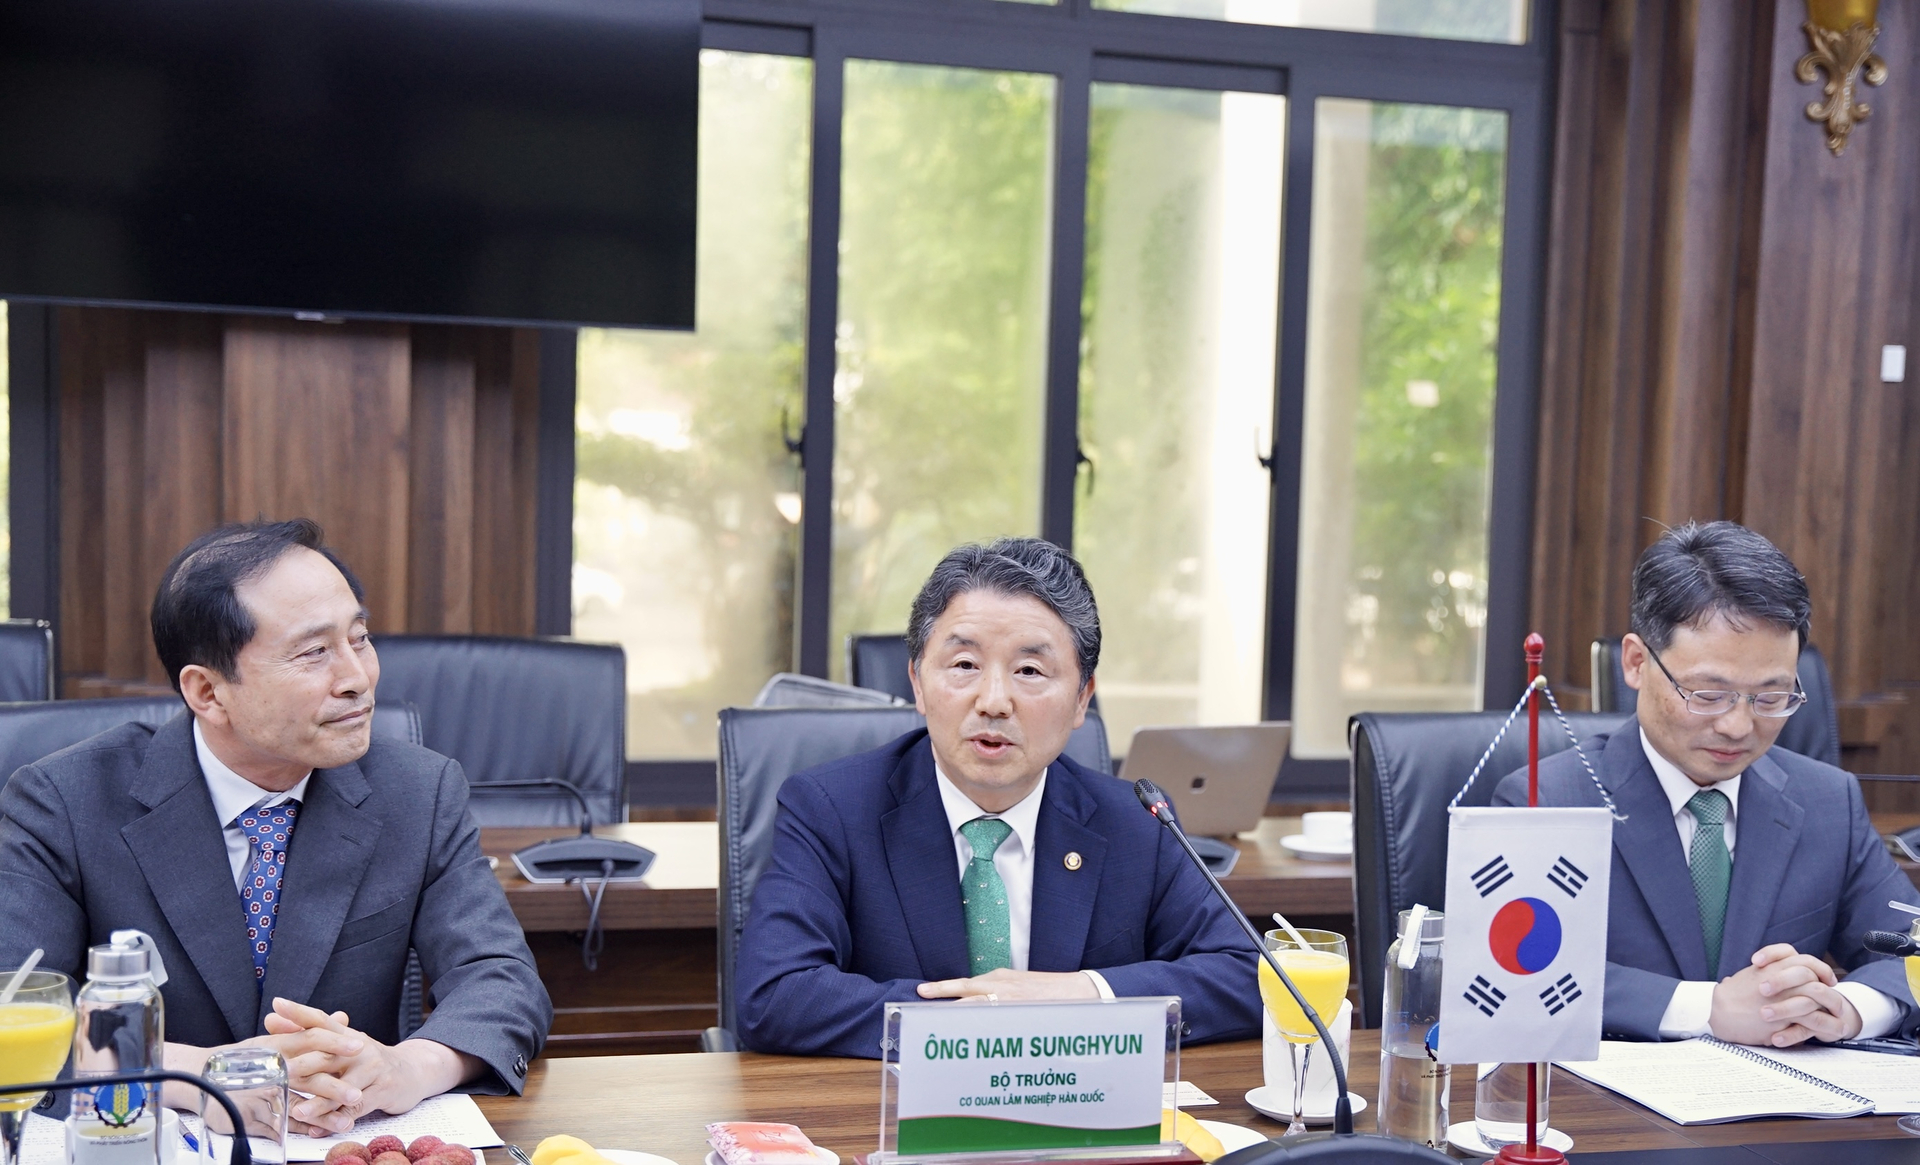 With current knowledge and expertise in the forestry sector, the Republic of Korea is willing to collaborate with Vietnam on projects and programs. Photo: Linh Linh. 